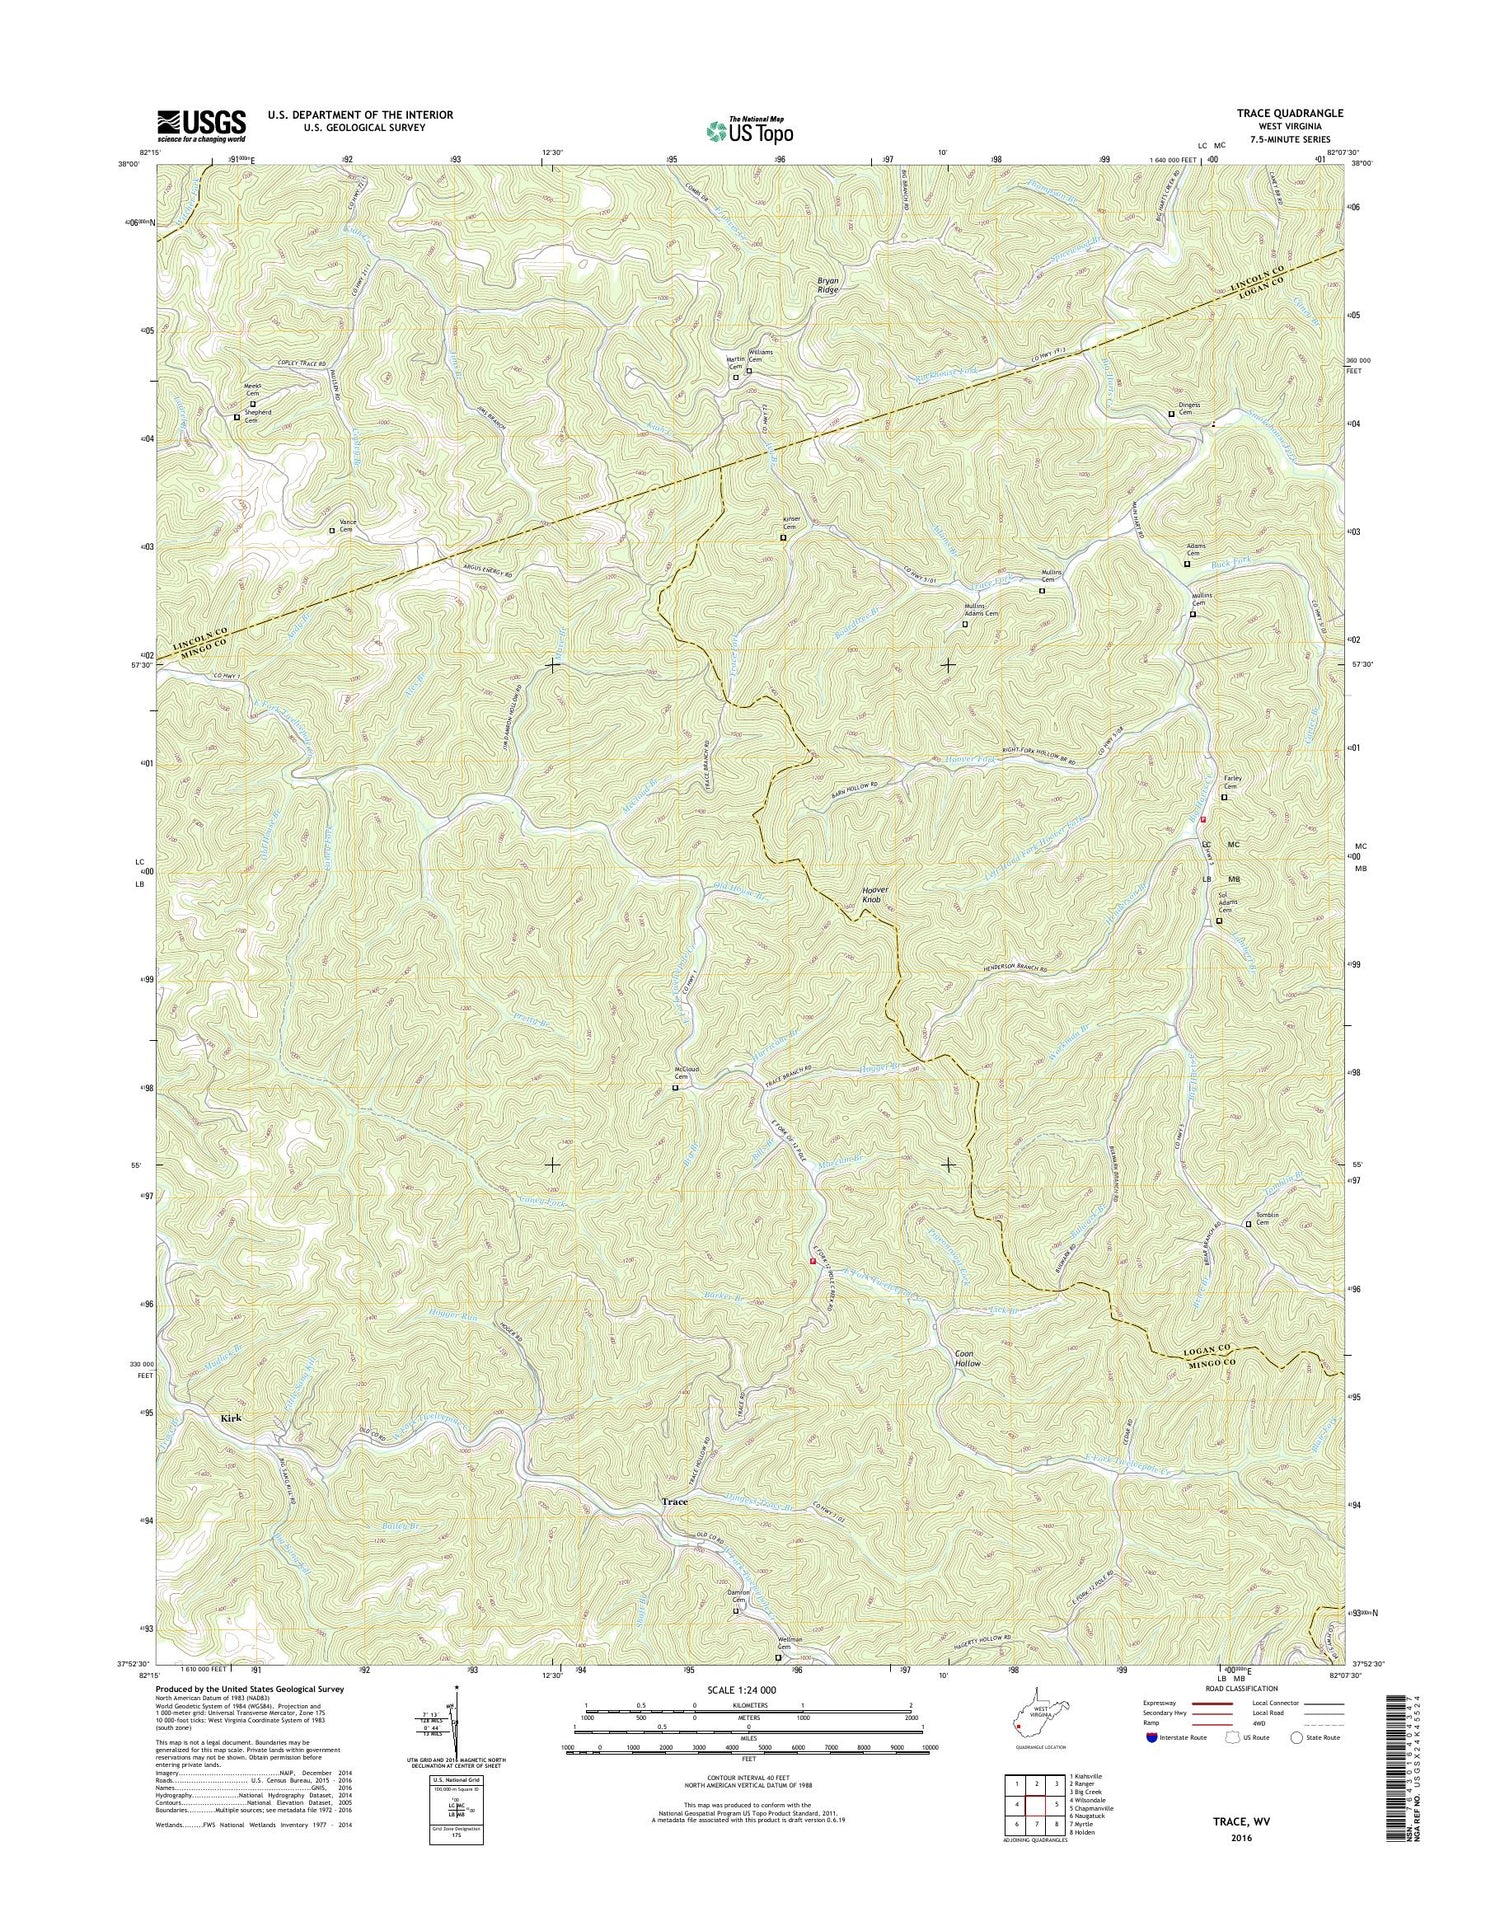 Trace West Virginia US Topo Map Image